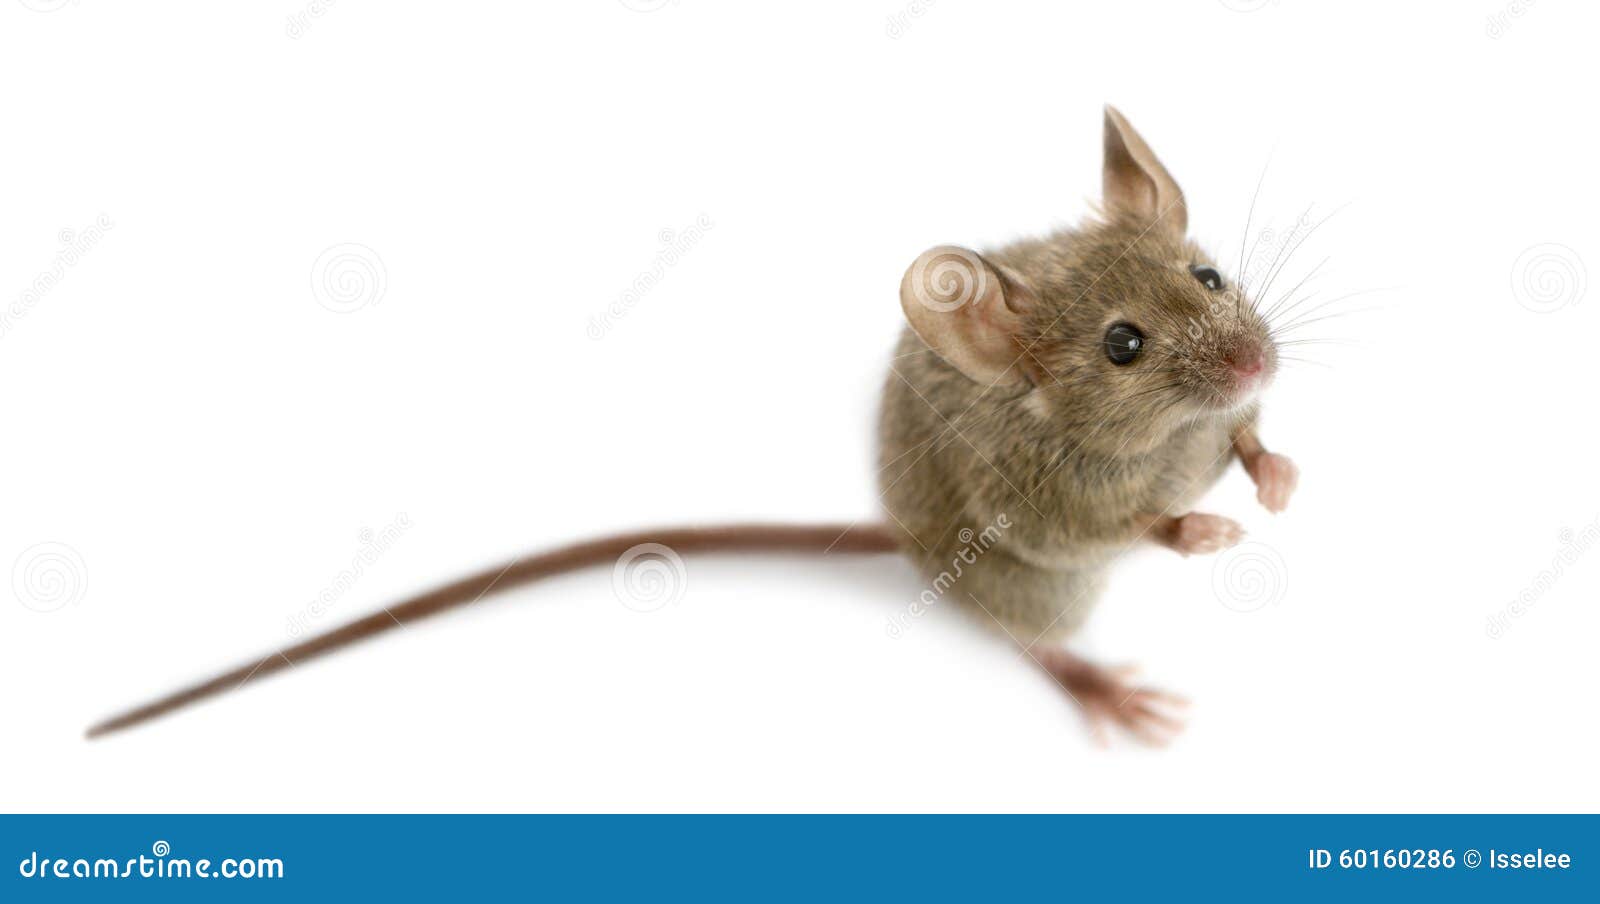 wood mouse in front of a white background